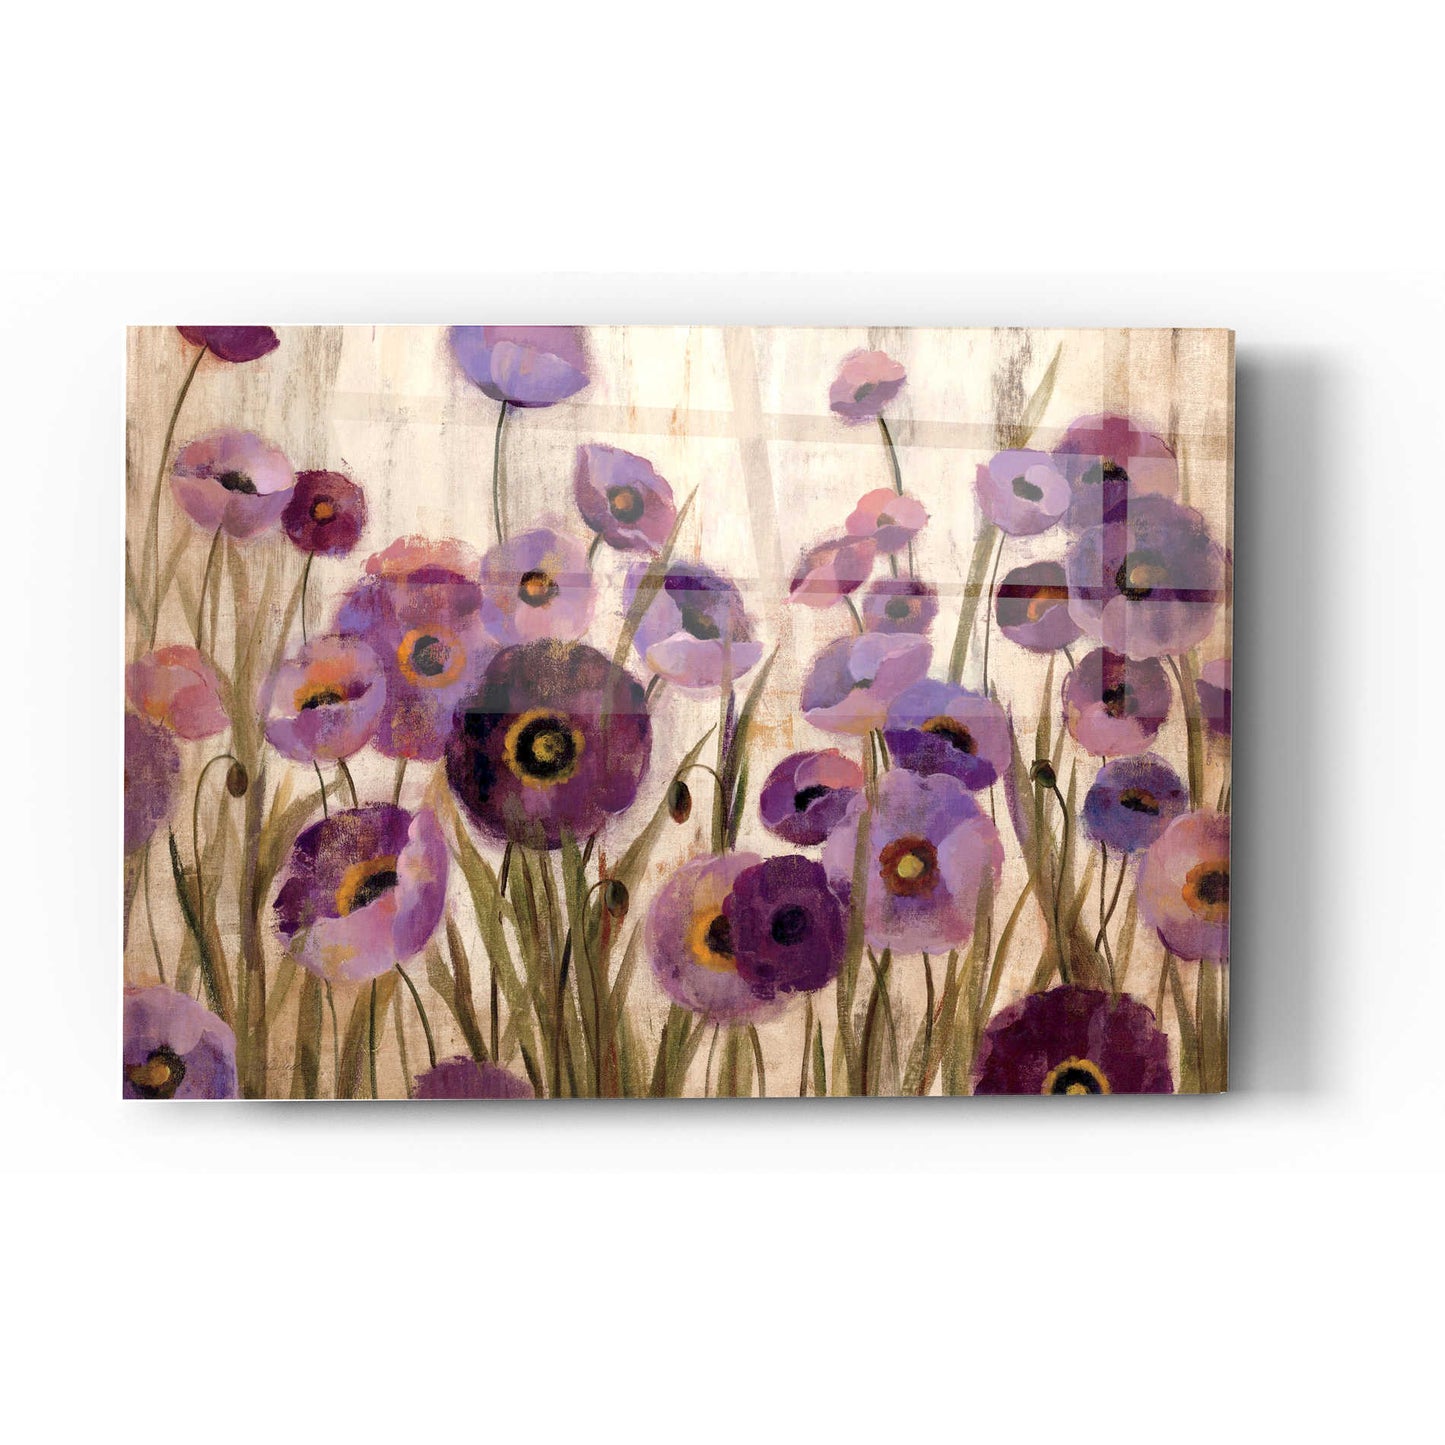 Epic Art 'Pink And Purple Flowers' by Silvia Vassileva, Acrylic Glass Wall Art,12x16